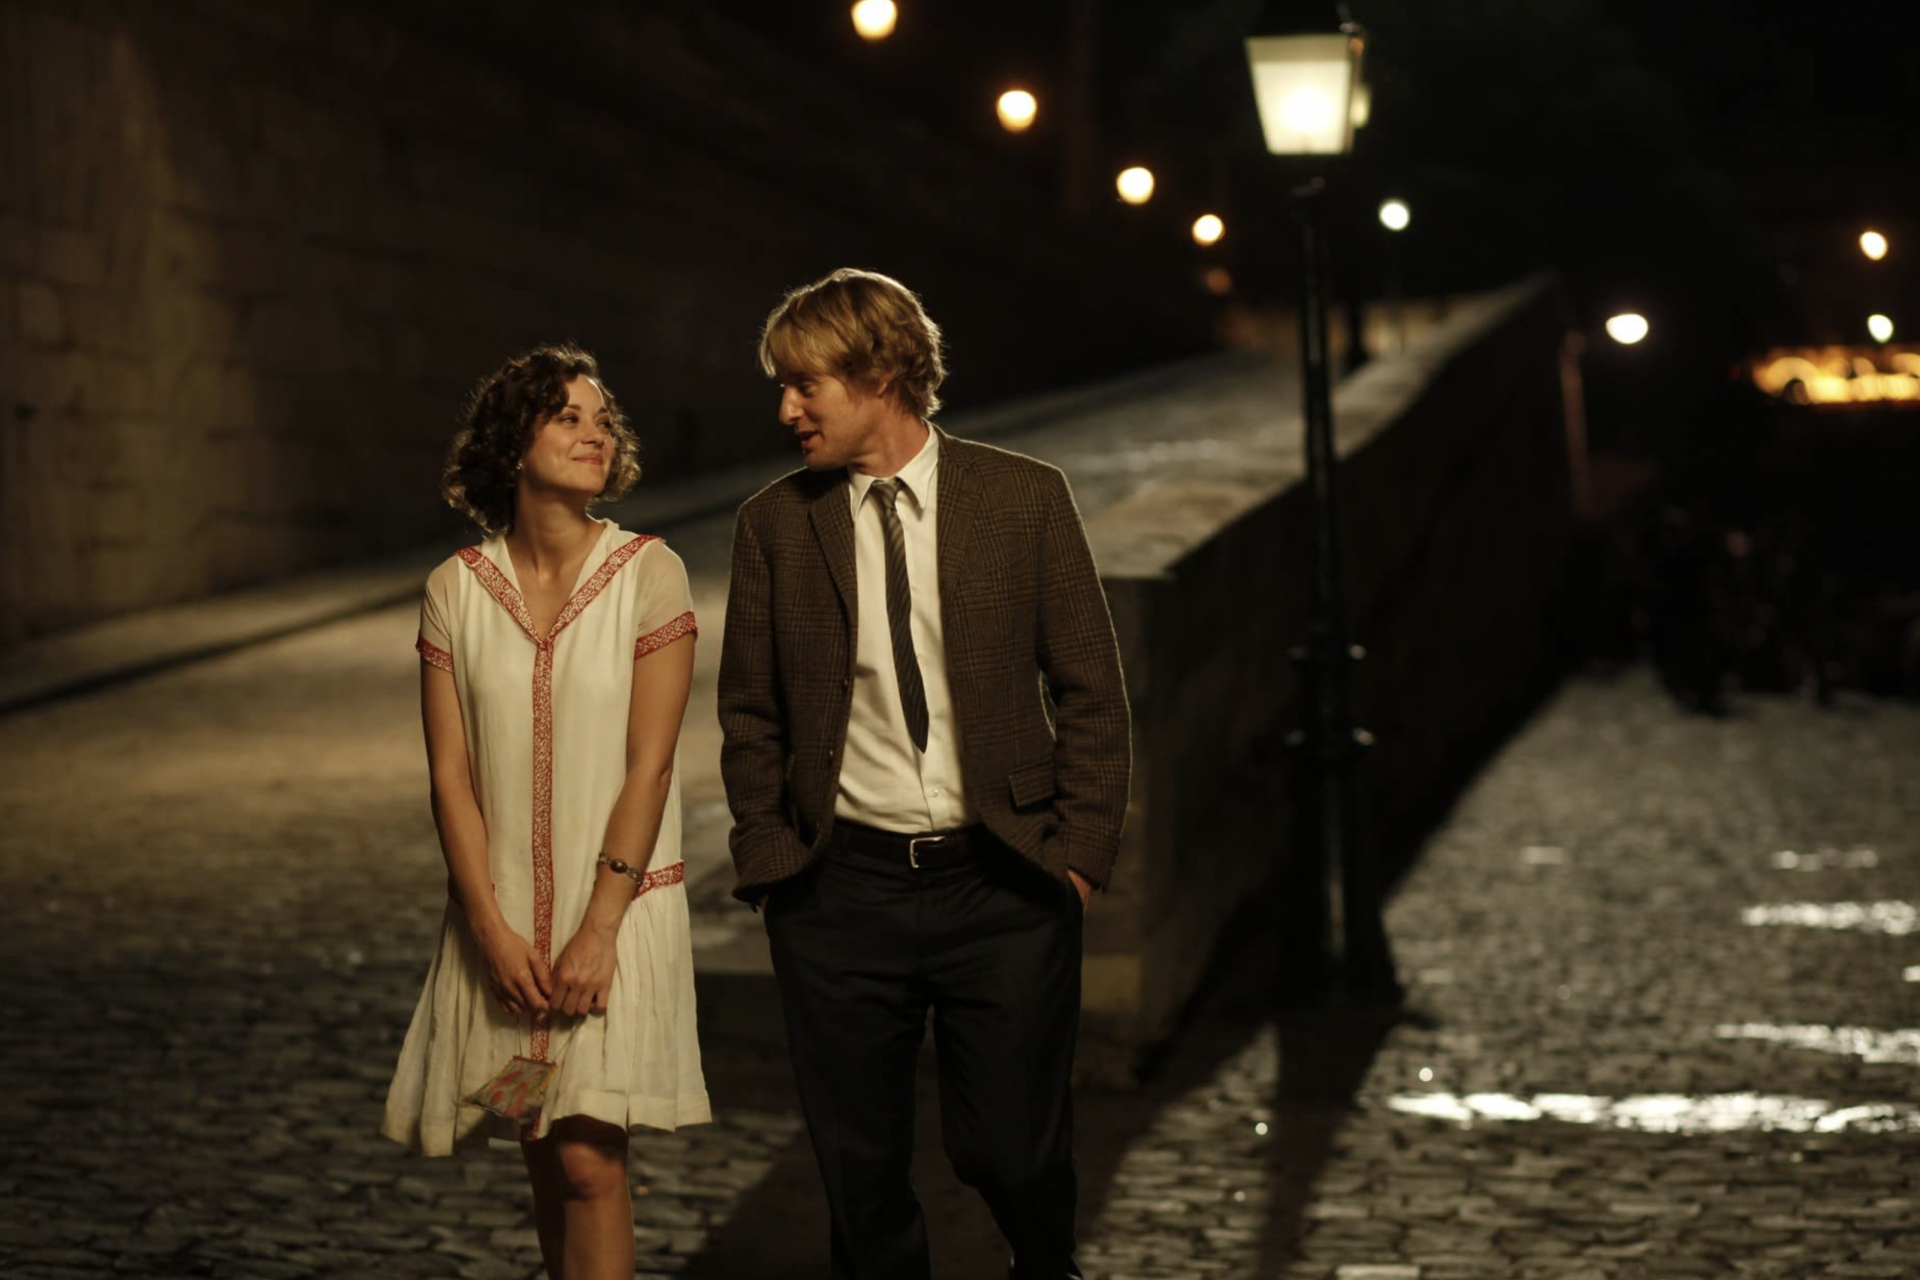 <p>Midnight in Paris - Can you go from being in Paris with your in-laws and fiancée in the 21st century to partying with Ernest Hemingway in the 1920s? You can if Woody Allen says so.</p> <p>Photo: Sony Pictures Classics</p>